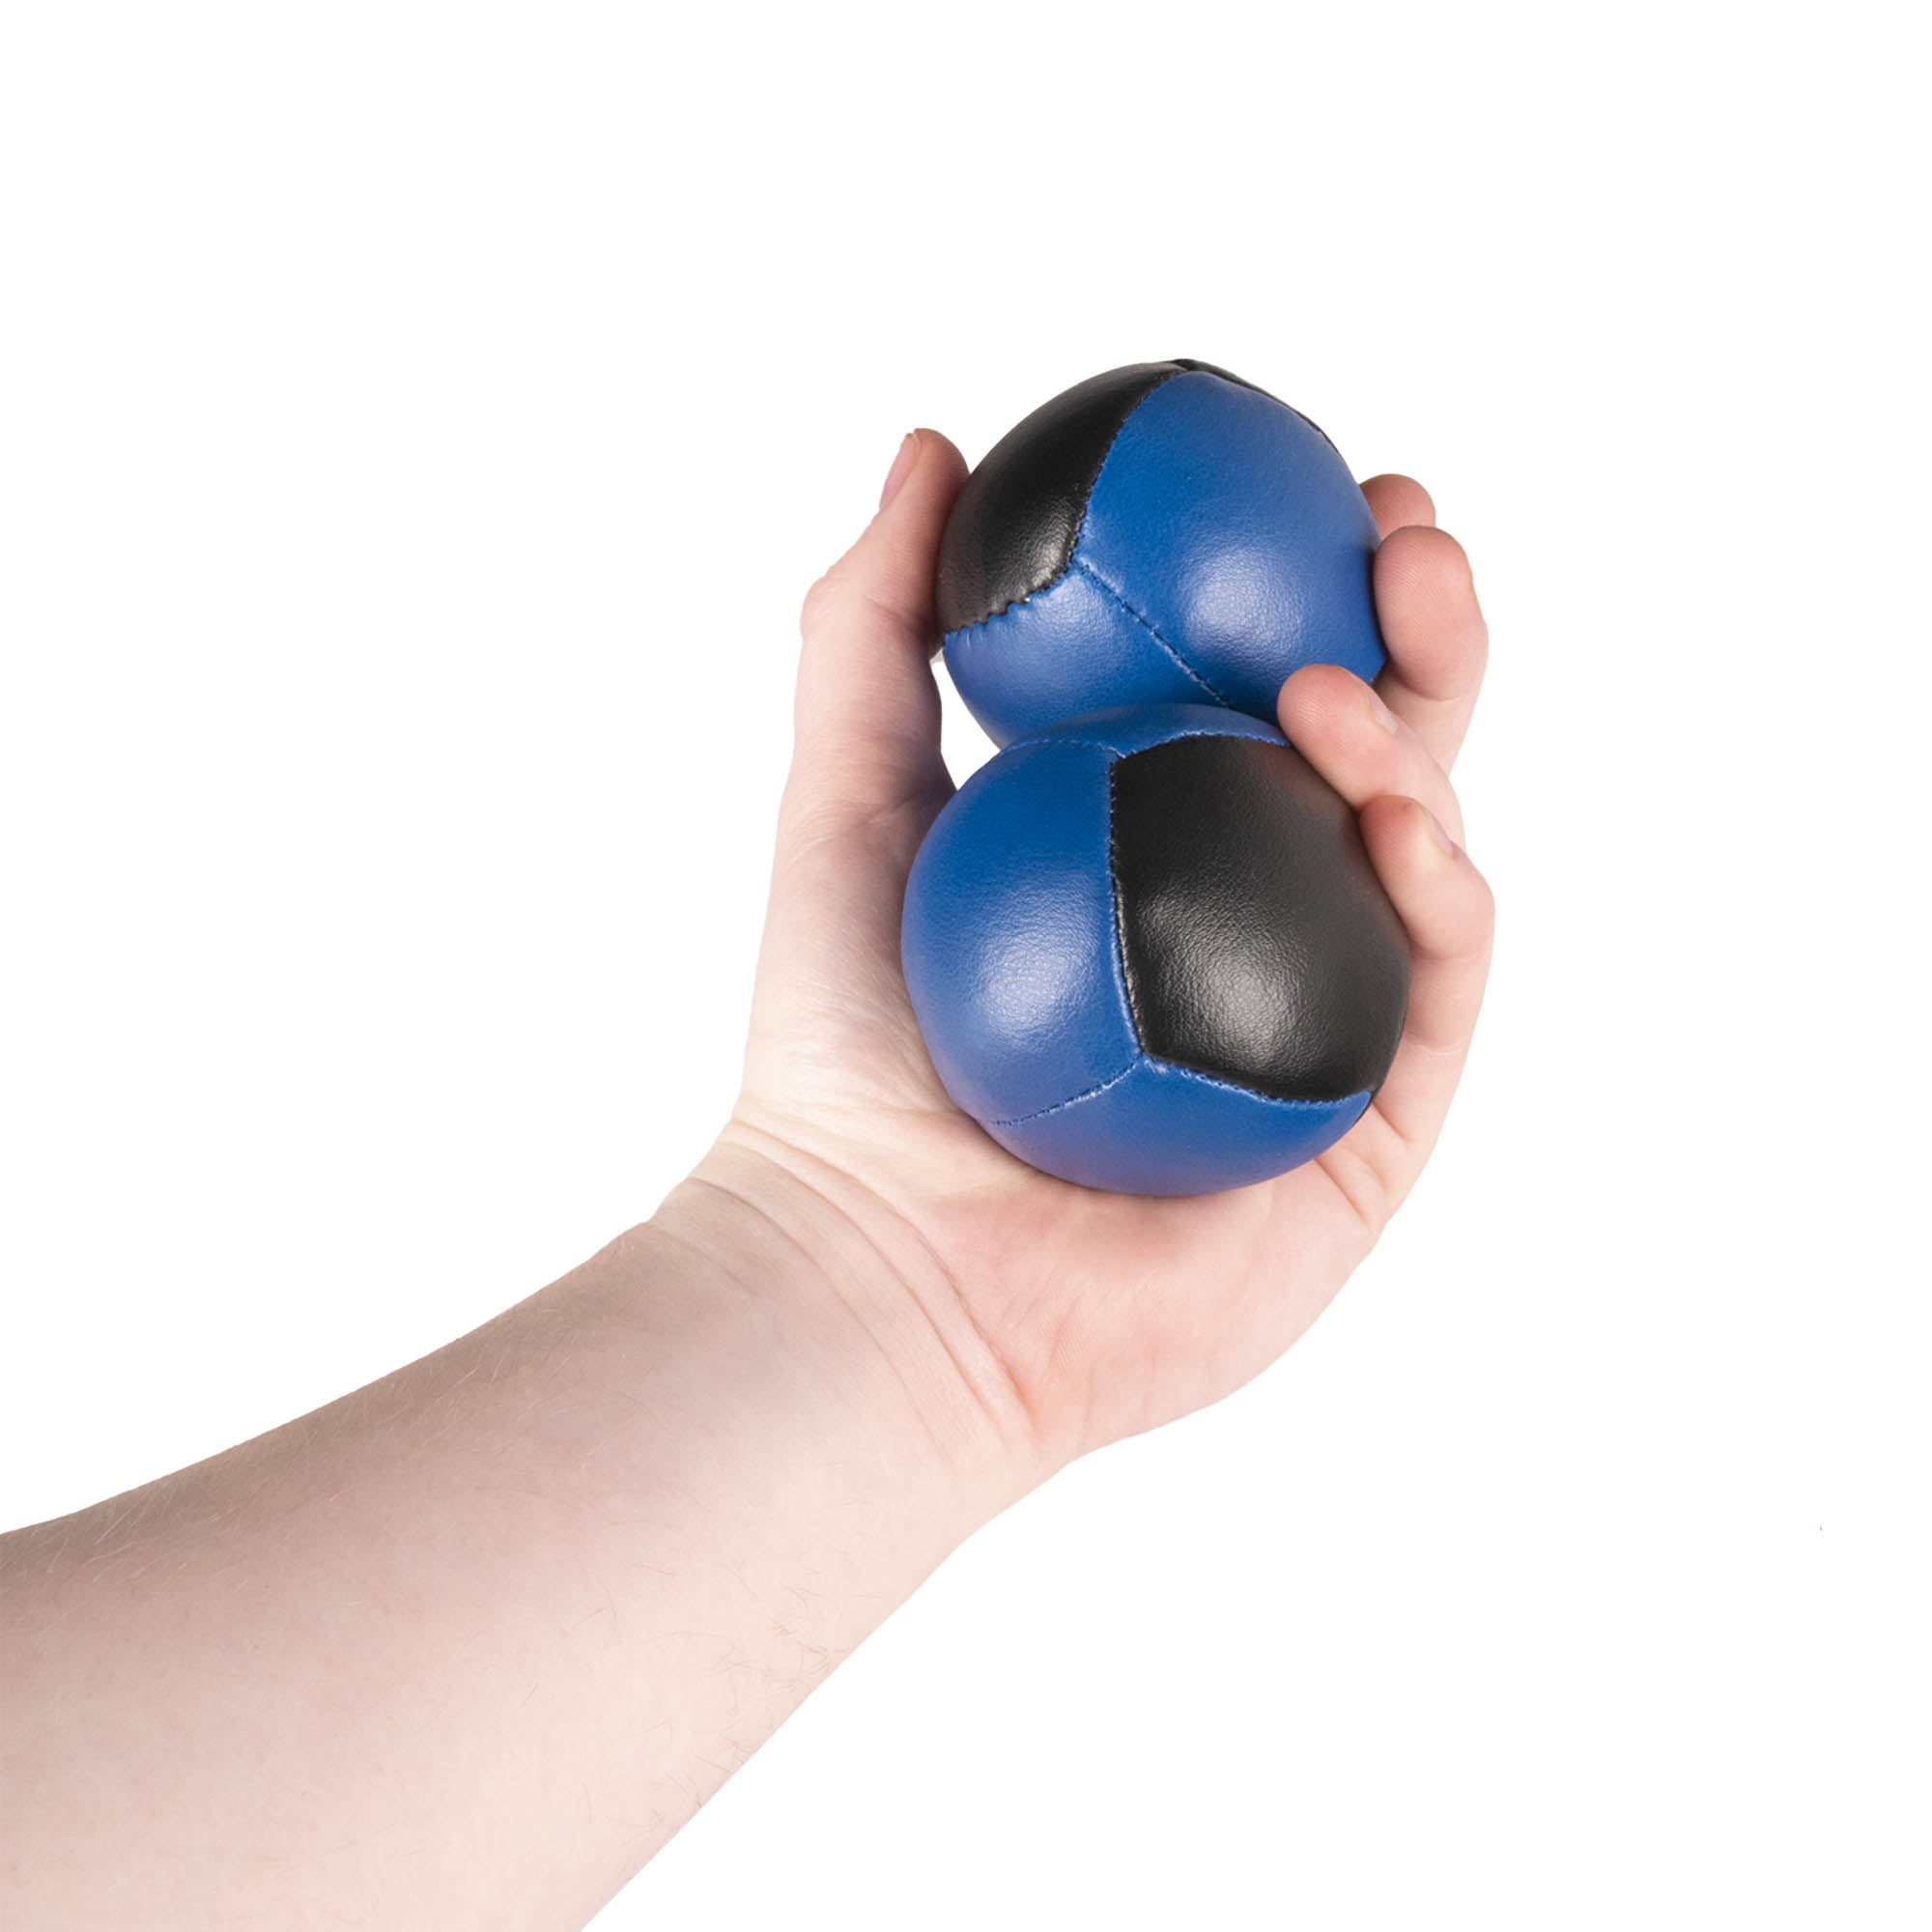 Firetoys two blue/black 110g thud juggling balls in hand